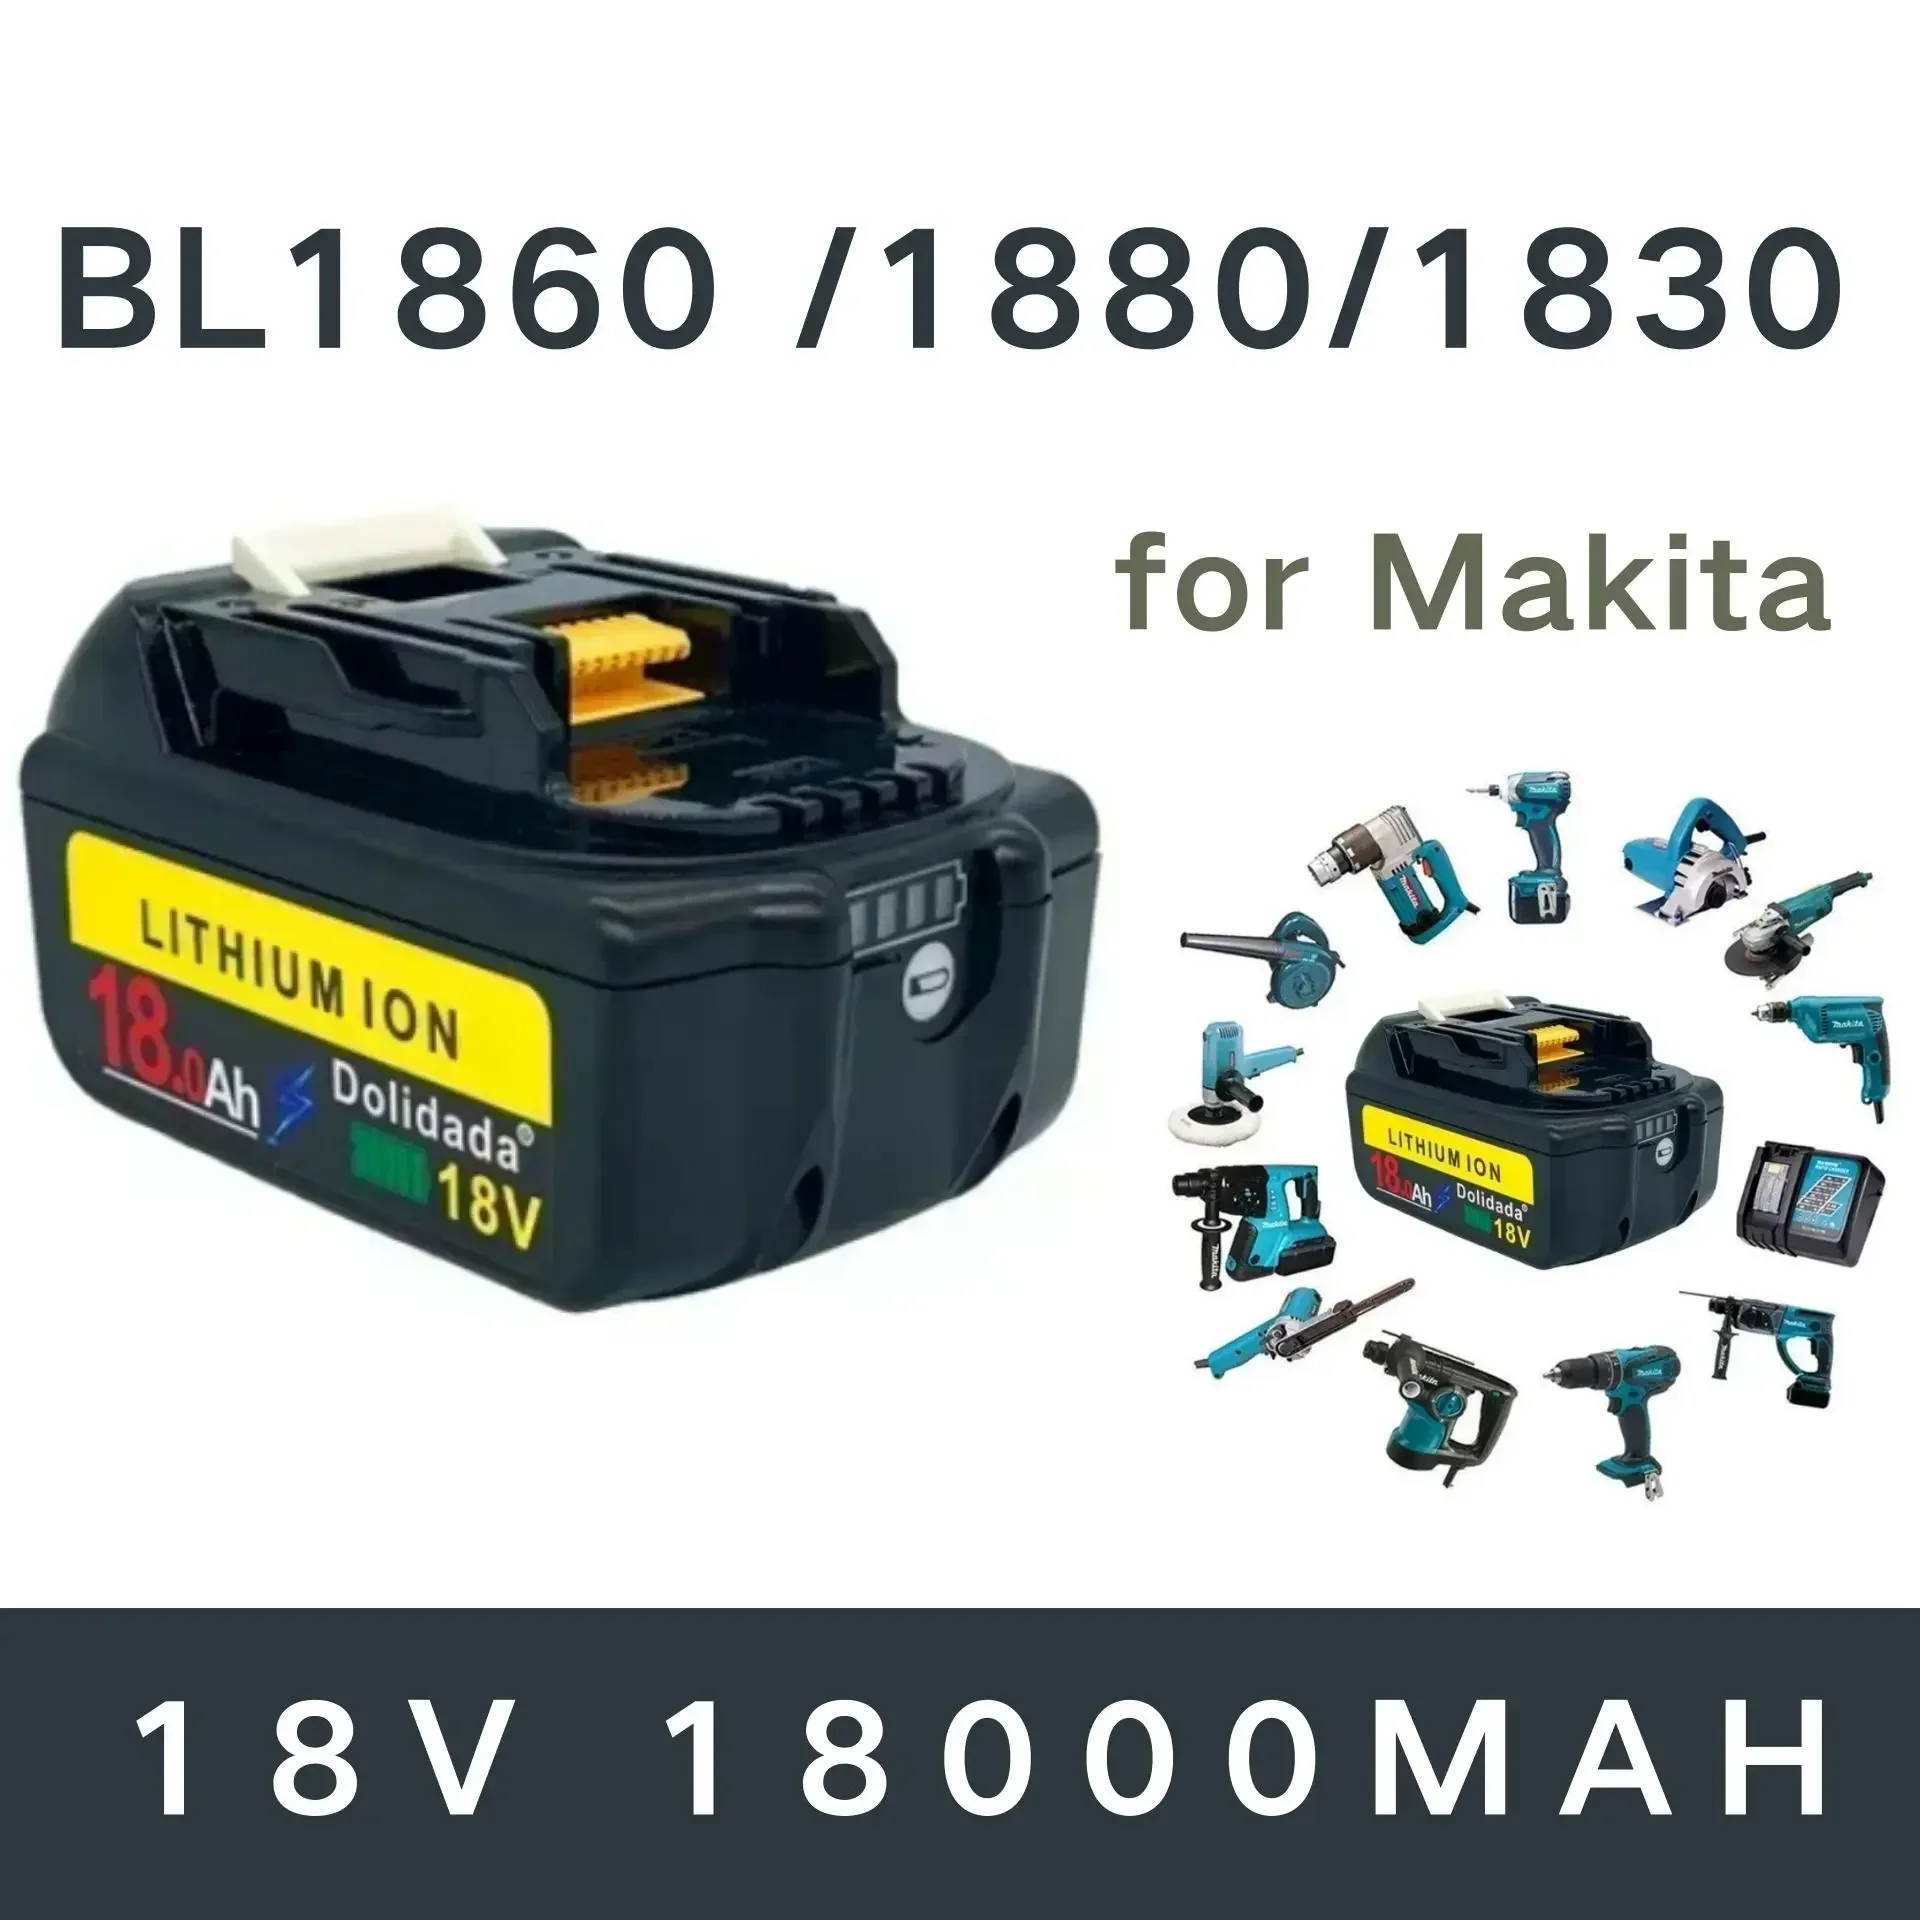 

New 18 Volt rechargeable battery 18000mah lithium ion battery Makita bl1880 bl1860 bl1830